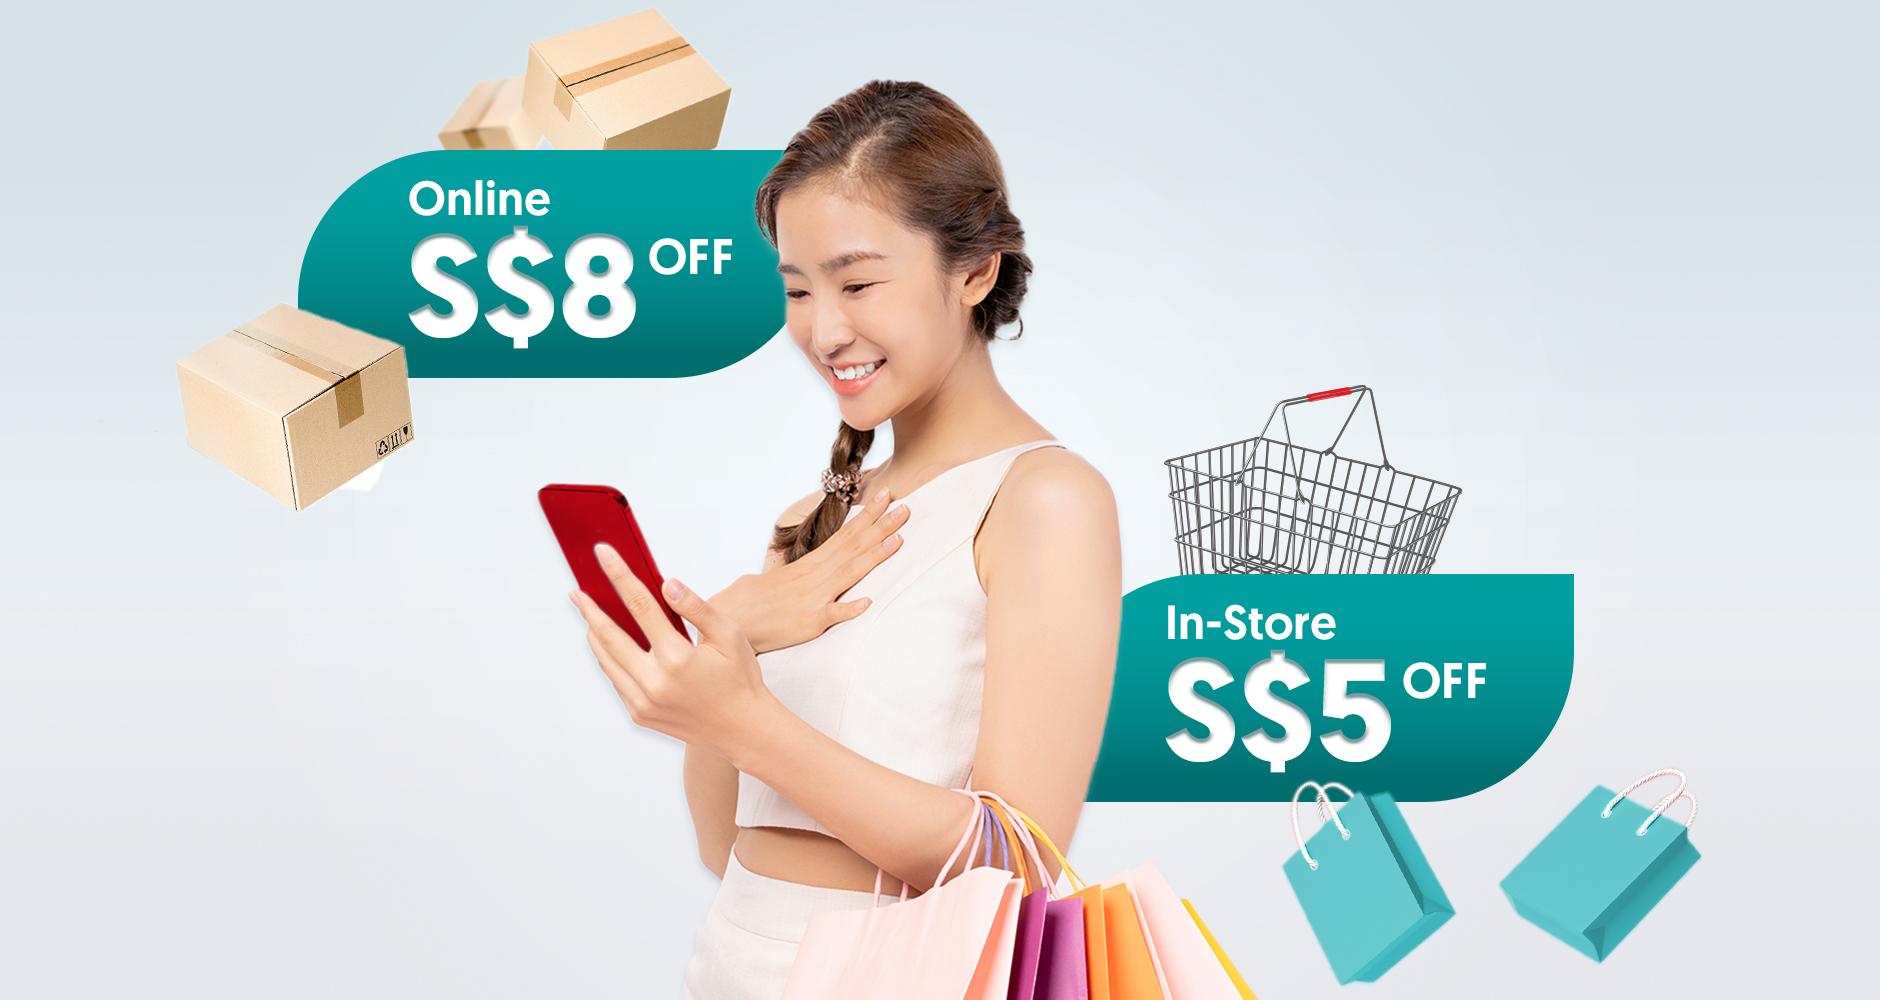 Up to S$8 off at Watsons with OCBC Cards